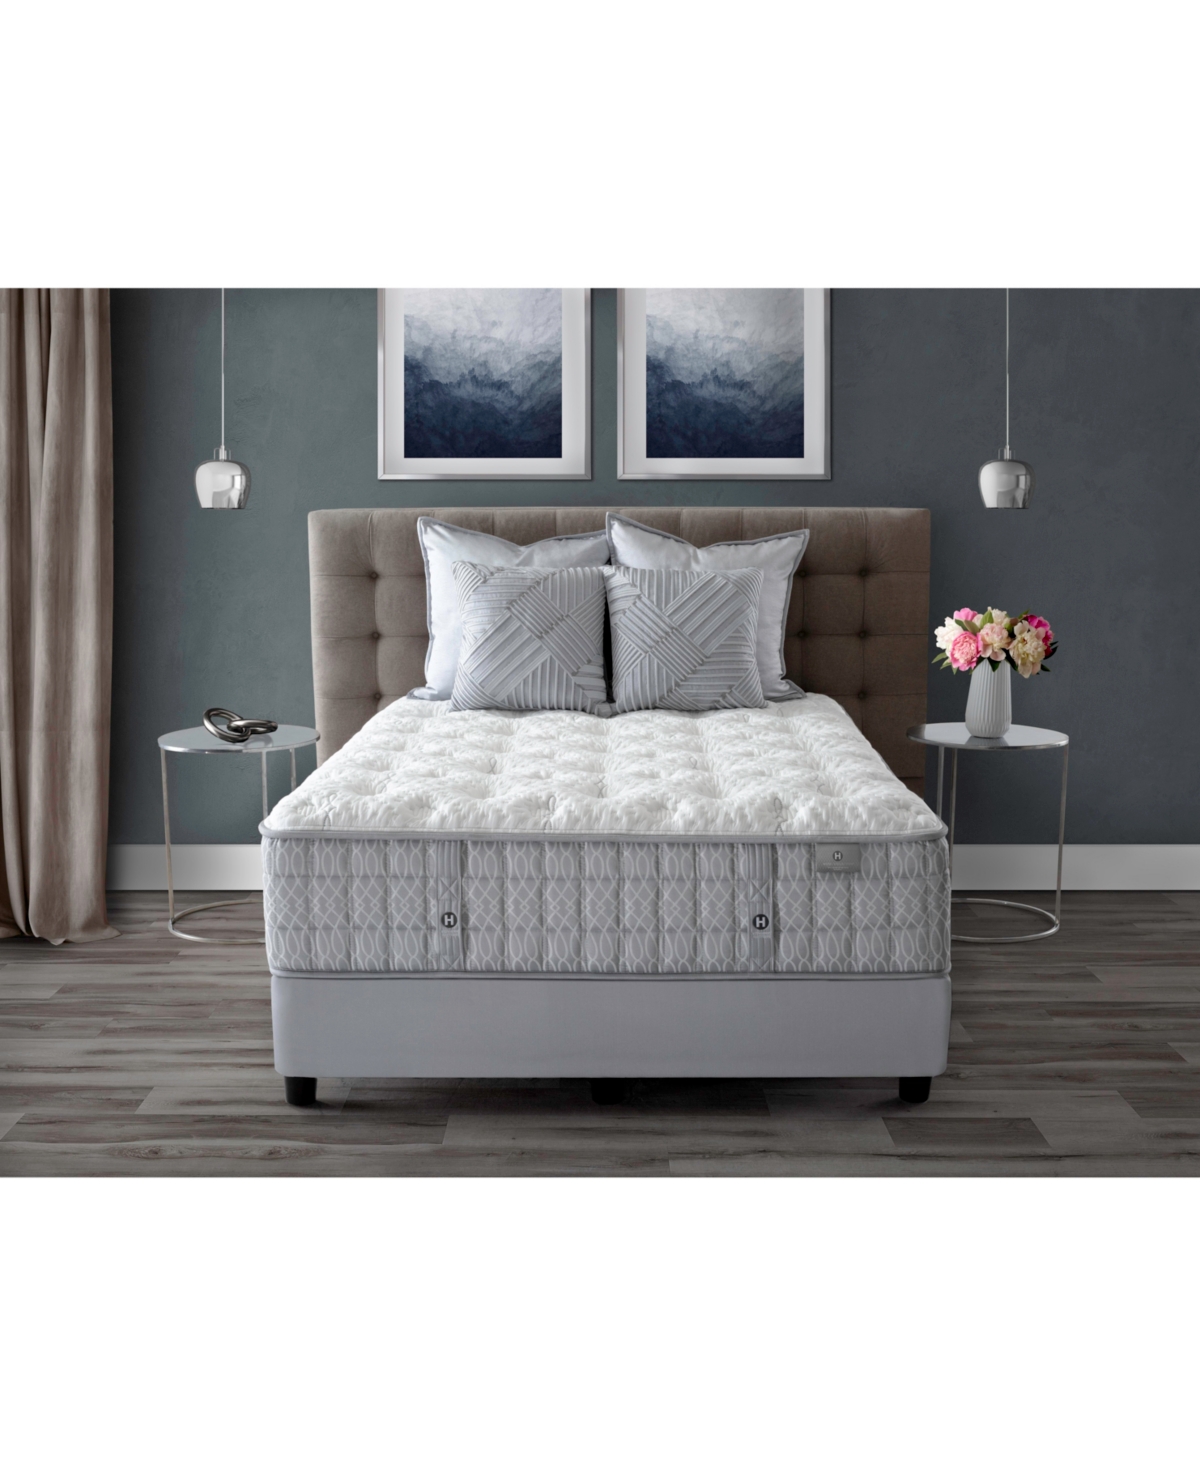 Hotel Collection By Aireloom Holland Maid Coppertech Silver Natural 14.5" Firm Mattress Set- Twin Xl, Created For Mac In No Color